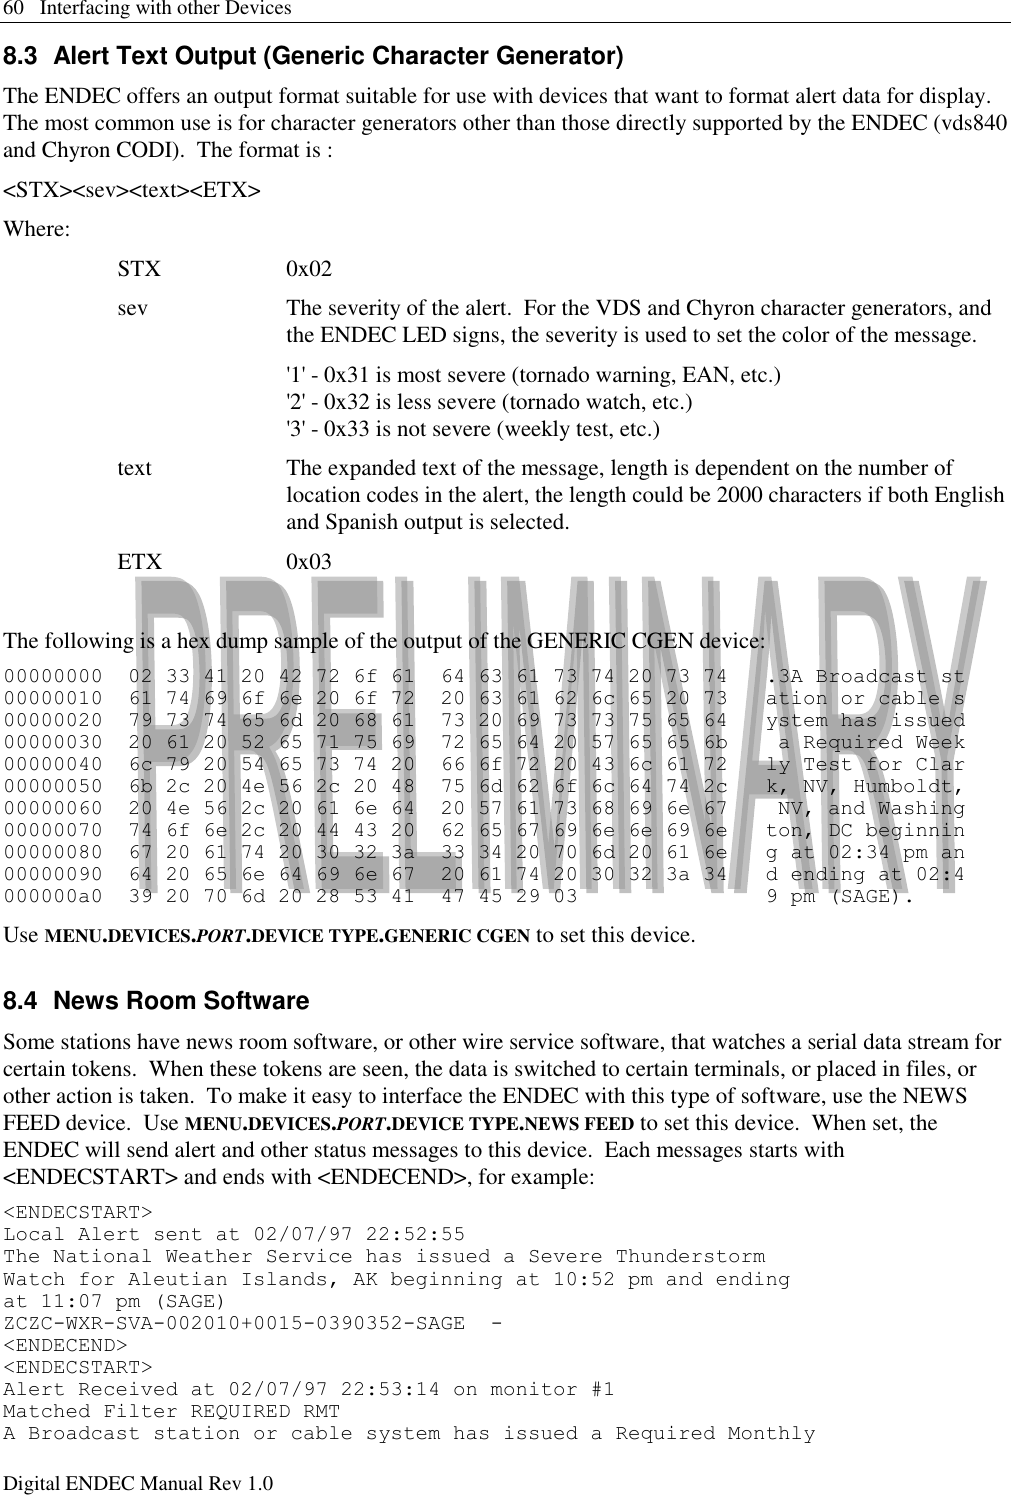 60   Interfacing with other Devices Digital ENDEC Manual Rev 1.0 8.3  Alert Text Output (Generic Character Generator) The ENDEC offers an output format suitable for use with devices that want to format alert data for display.  The most common use is for character generators other than those directly supported by the ENDEC (vds840 and Chyron CODI).  The format is : &lt;STX&gt;&lt;sev&gt;&lt;text&gt;&lt;ETX&gt; Where: STX 0x02 sev The severity of the alert.  For the VDS and Chyron character generators, and the ENDEC LED signs, the severity is used to set the color of the message. &apos;1&apos; - 0x31 is most severe (tornado warning, EAN, etc.) &apos;2&apos; - 0x32 is less severe (tornado watch, etc.) &apos;3&apos; - 0x33 is not severe (weekly test, etc.) text The expanded text of the message, length is dependent on the number of location codes in the alert, the length could be 2000 characters if both English and Spanish output is selected. ETX 0x03  The following is a hex dump sample of the output of the GENERIC CGEN device: 00000000  02 33 41 20 42 72 6f 61  64 63 61 73 74 20 73 74   .3A Broadcast st 00000010  61 74 69 6f 6e 20 6f 72  20 63 61 62 6c 65 20 73   ation or cable s 00000020  79 73 74 65 6d 20 68 61  73 20 69 73 73 75 65 64   ystem has issued 00000030  20 61 20 52 65 71 75 69  72 65 64 20 57 65 65 6b    a Required Week 00000040  6c 79 20 54 65 73 74 20  66 6f 72 20 43 6c 61 72   ly Test for Clar 00000050  6b 2c 20 4e 56 2c 20 48  75 6d 62 6f 6c 64 74 2c   k, NV, Humboldt, 00000060  20 4e 56 2c 20 61 6e 64  20 57 61 73 68 69 6e 67    NV, and Washing 00000070  74 6f 6e 2c 20 44 43 20  62 65 67 69 6e 6e 69 6e   ton, DC beginnin 00000080  67 20 61 74 20 30 32 3a  33 34 20 70 6d 20 61 6e   g at 02:34 pm an 00000090  64 20 65 6e 64 69 6e 67  20 61 74 20 30 32 3a 34   d ending at 02:4 000000a0  39 20 70 6d 20 28 53 41  47 45 29 03               9 pm (SAGE). Use MENU.DEVICES.PORT.DEVICE TYPE.GENERIC CGEN to set this device. 8.4  News Room Software Some stations have news room software, or other wire service software, that watches a serial data stream for certain tokens.  When these tokens are seen, the data is switched to certain terminals, or placed in files, or other action is taken.  To make it easy to interface the ENDEC with this type of software, use the NEWS FEED device.  Use MENU.DEVICES.PORT.DEVICE TYPE.NEWS FEED to set this device.  When set, the ENDEC will send alert and other status messages to this device.  Each messages starts with &lt;ENDECSTART&gt; and ends with &lt;ENDECEND&gt;, for example: &lt;ENDECSTART&gt; Local Alert sent at 02/07/97 22:52:55  The National Weather Service has issued a Severe Thunderstorm  Watch for Aleutian Islands, AK beginning at 10:52 pm and ending  at 11:07 pm (SAGE) ZCZC-WXR-SVA-002010+0015-0390352-SAGE  - &lt;ENDECEND&gt; &lt;ENDECSTART&gt; Alert Received at 02/07/97 22:53:14 on monitor #1 Matched Filter REQUIRED RMT A Broadcast station or cable system has issued a Required Monthly  